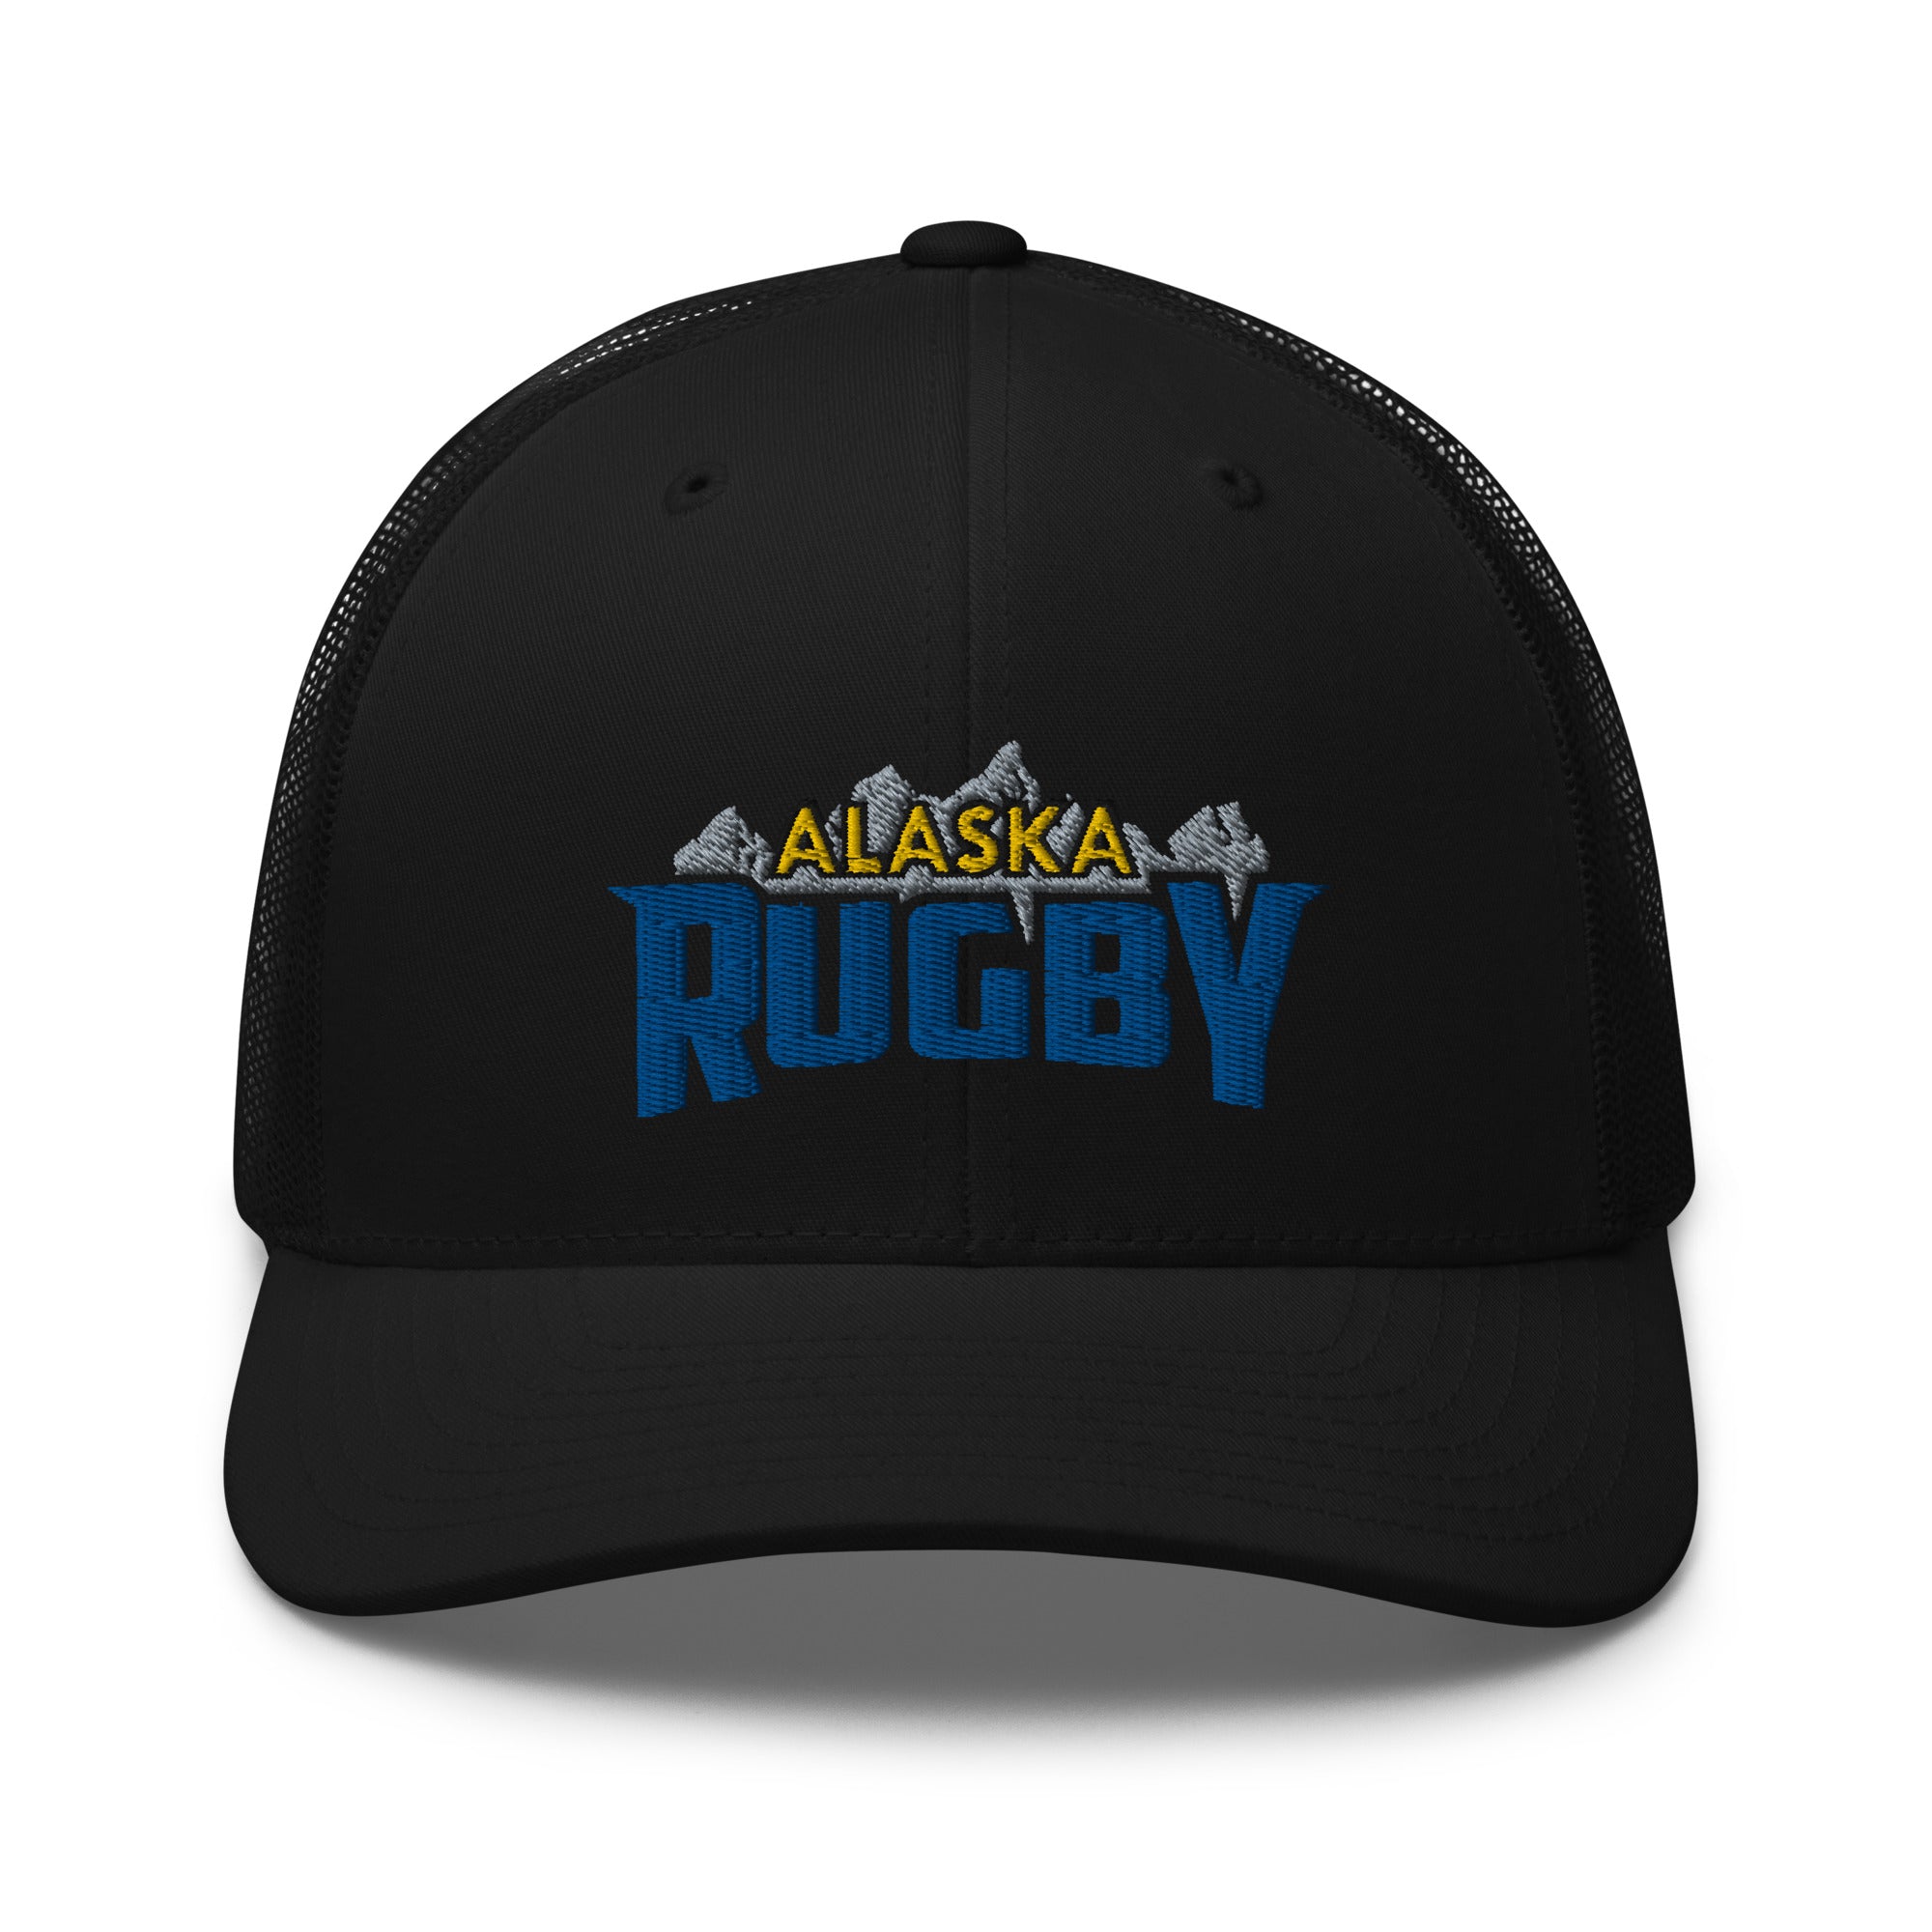 Rugby Imports Alaska Rugby Retro Trucker Cap